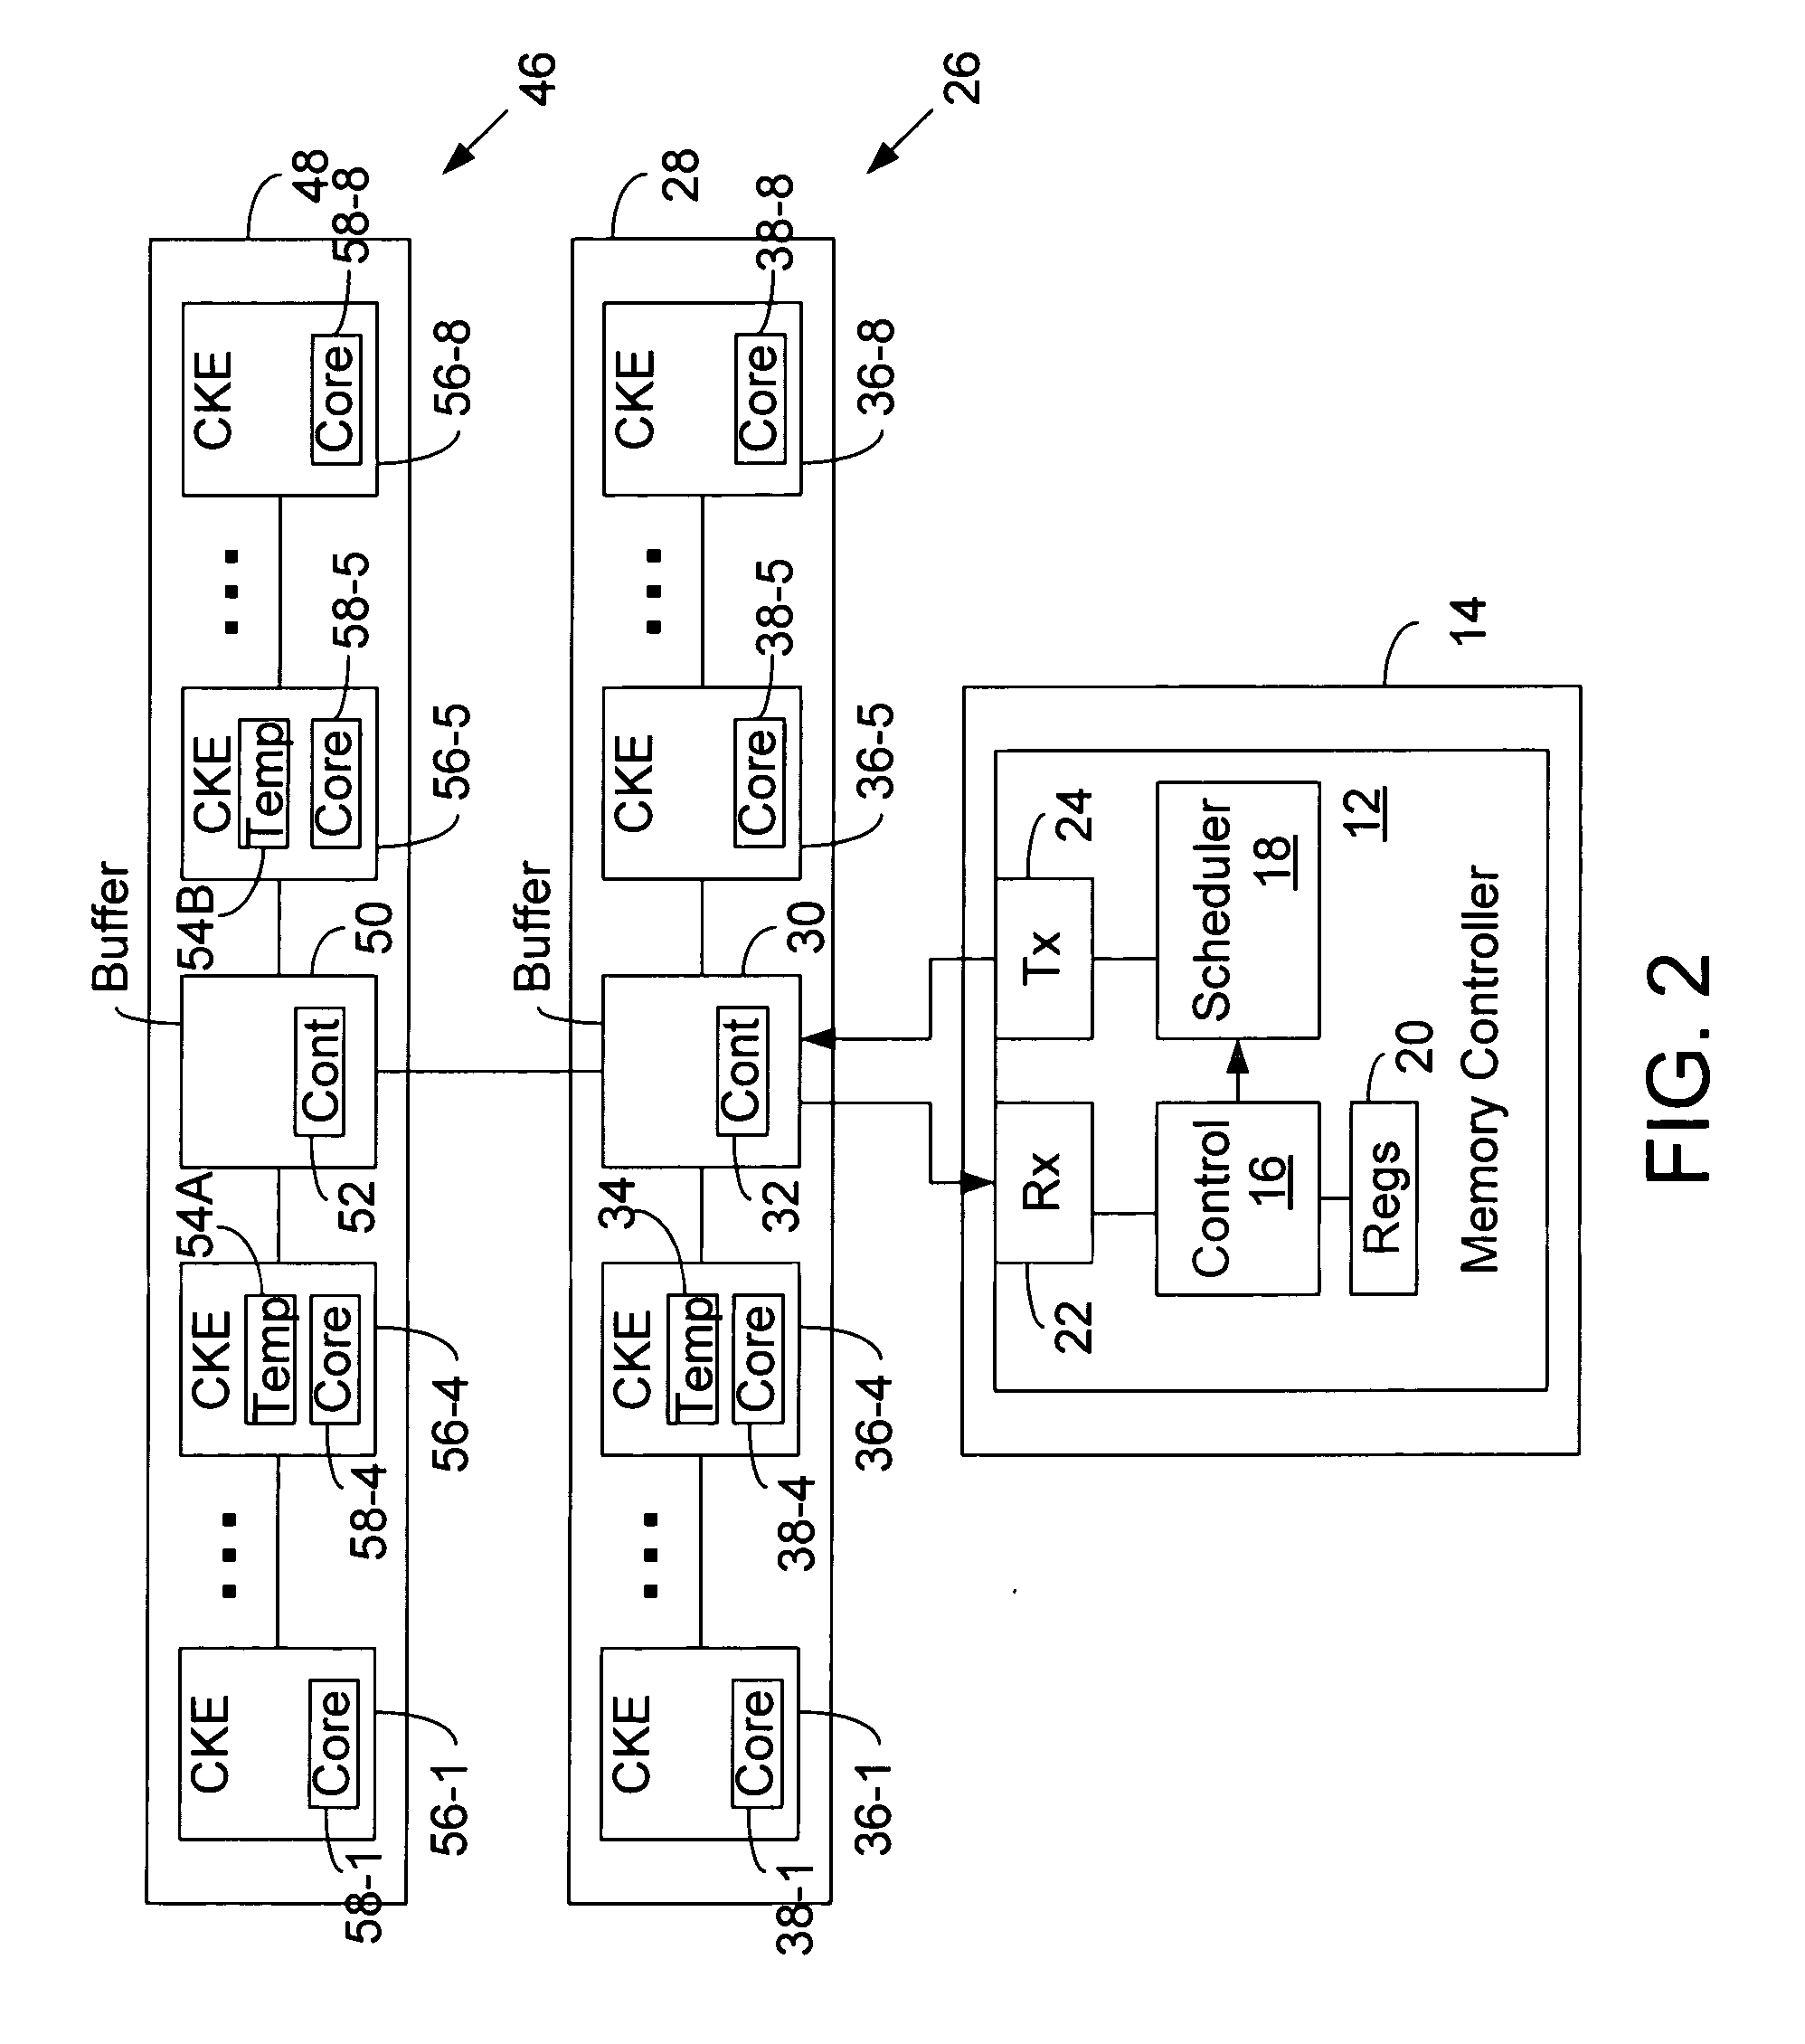 Power management using adaptive thermal throttling